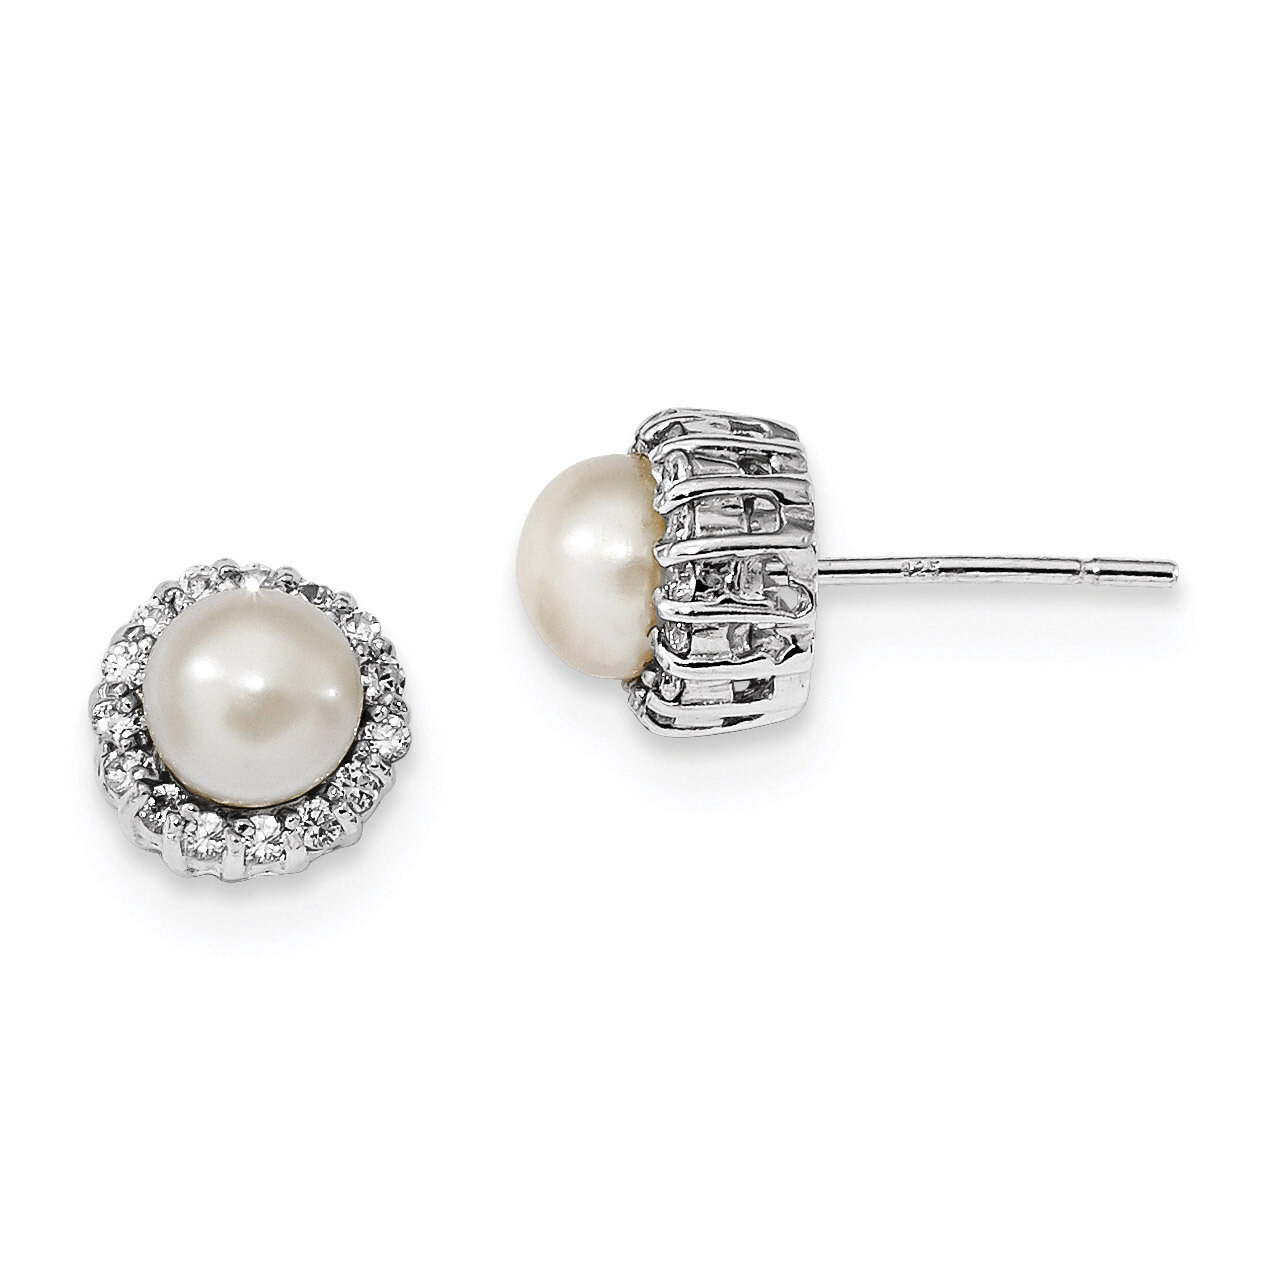 CZ Diamond & Freshwater Cultured Pearl Post Earrings Sterling Silver Rhodium-plated QE13870